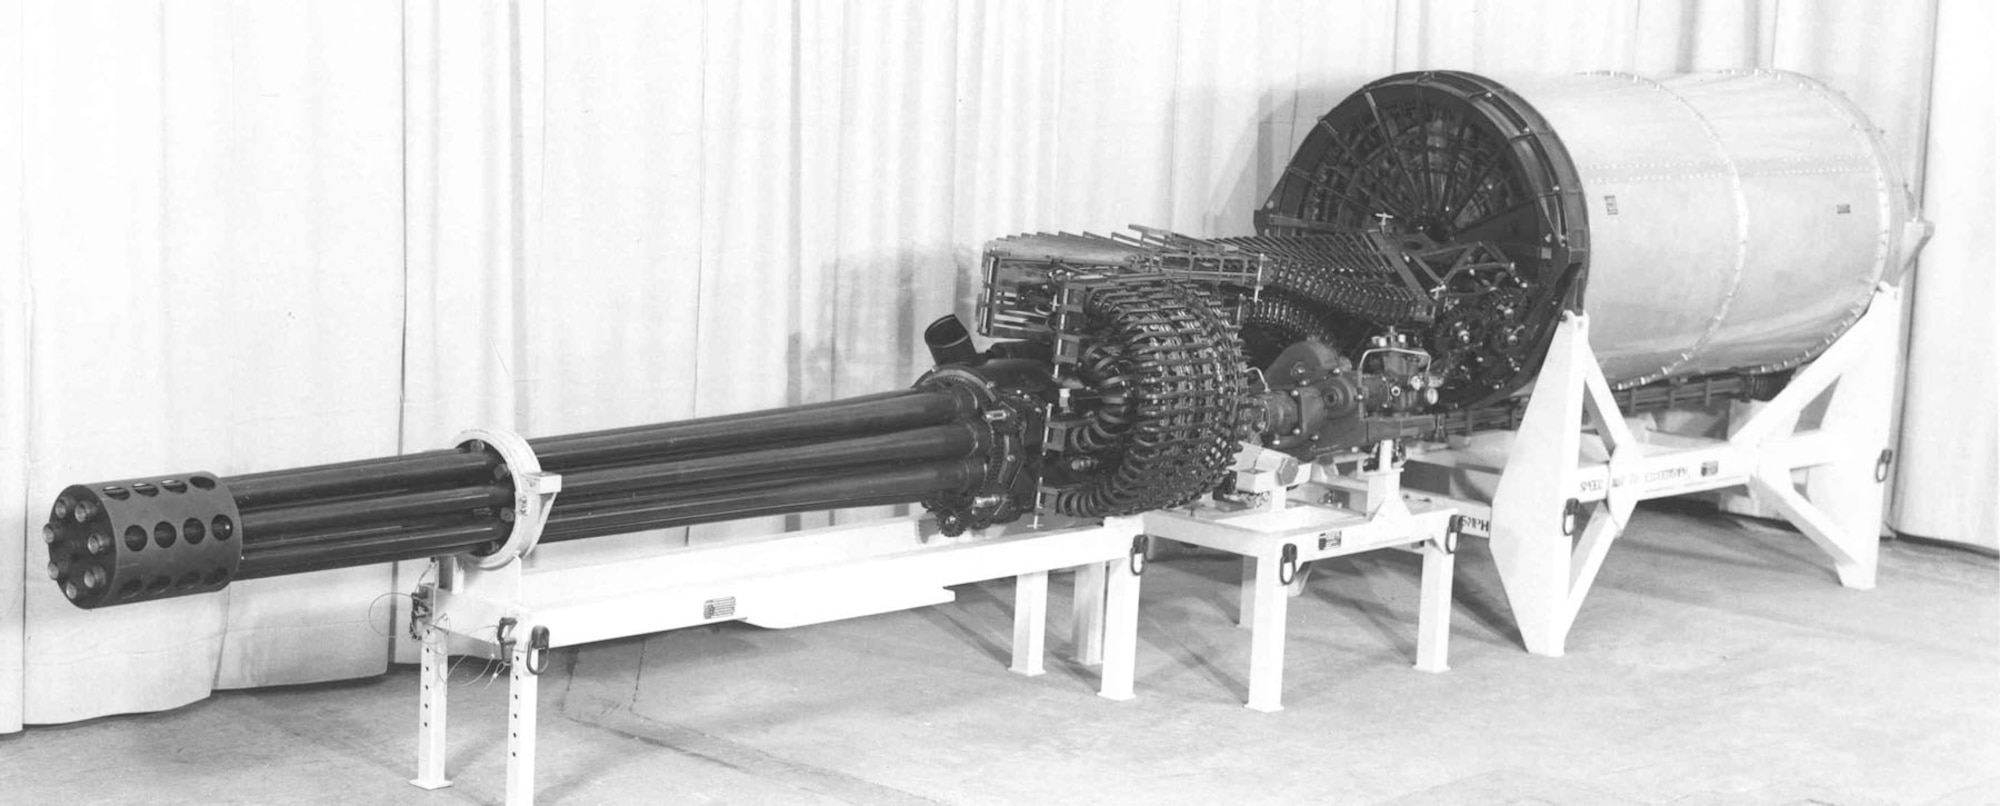 General Electric GAU-8/A on display stand. (U.S. Air Force photo)